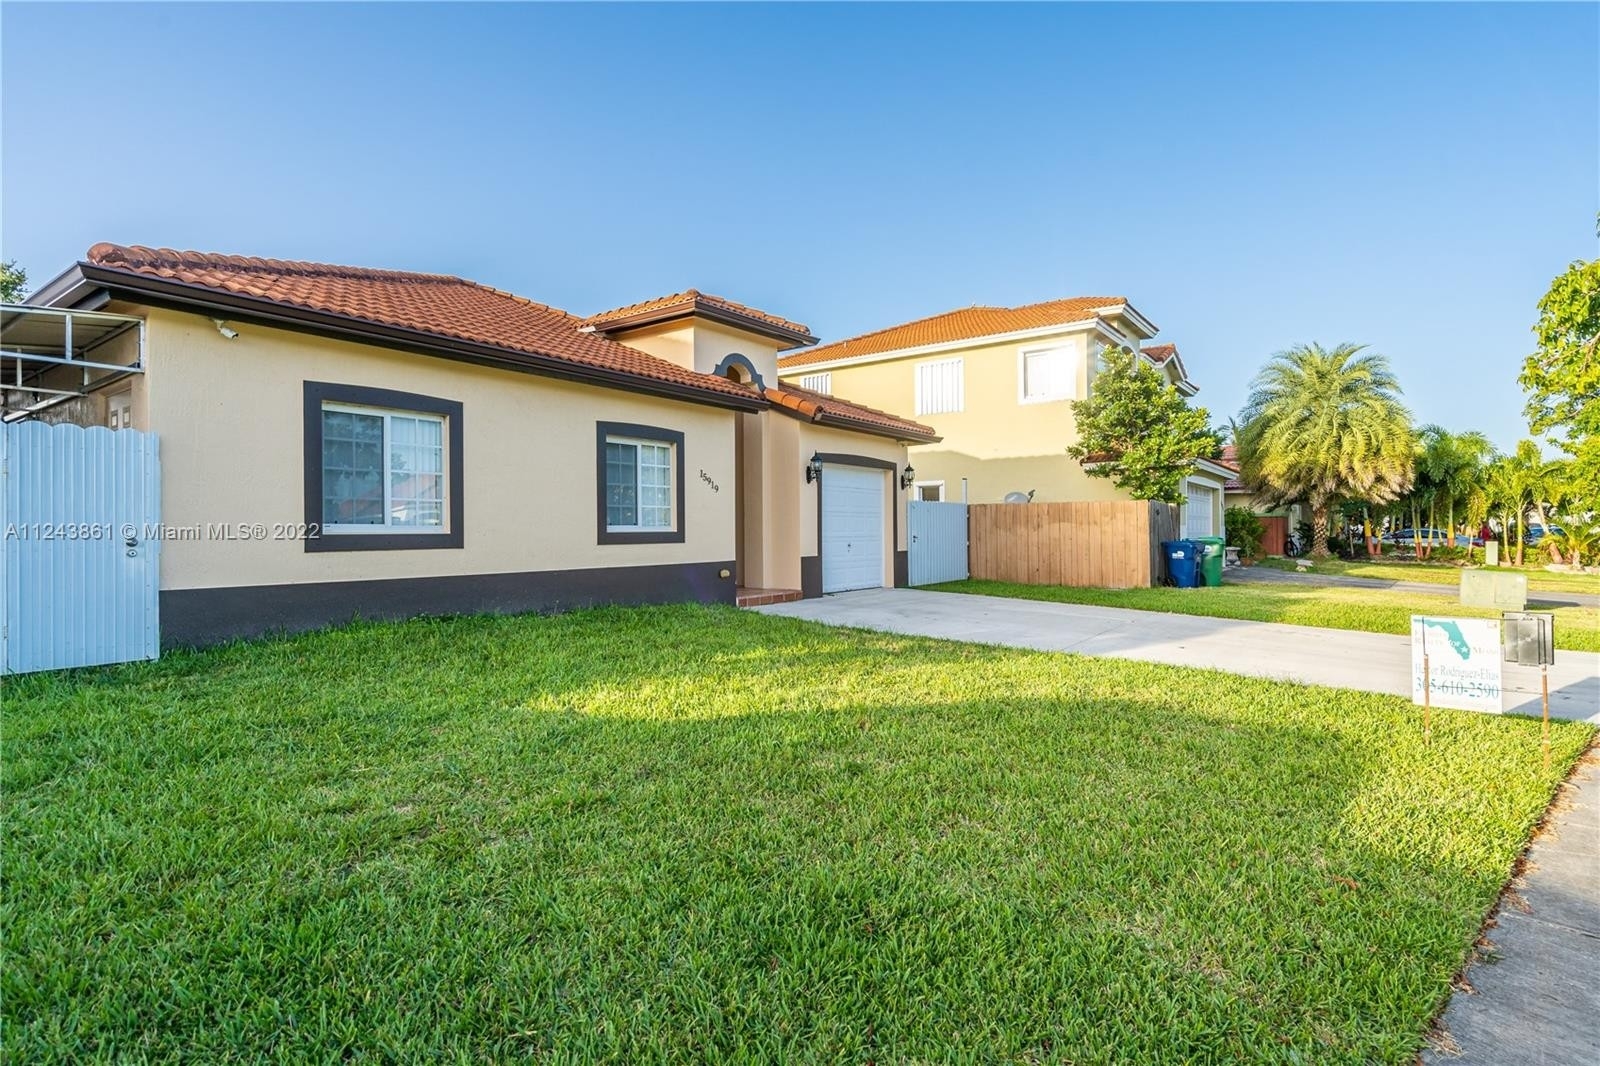 Single Family Home for Sale at Leisure City, Homestead, FL 33033